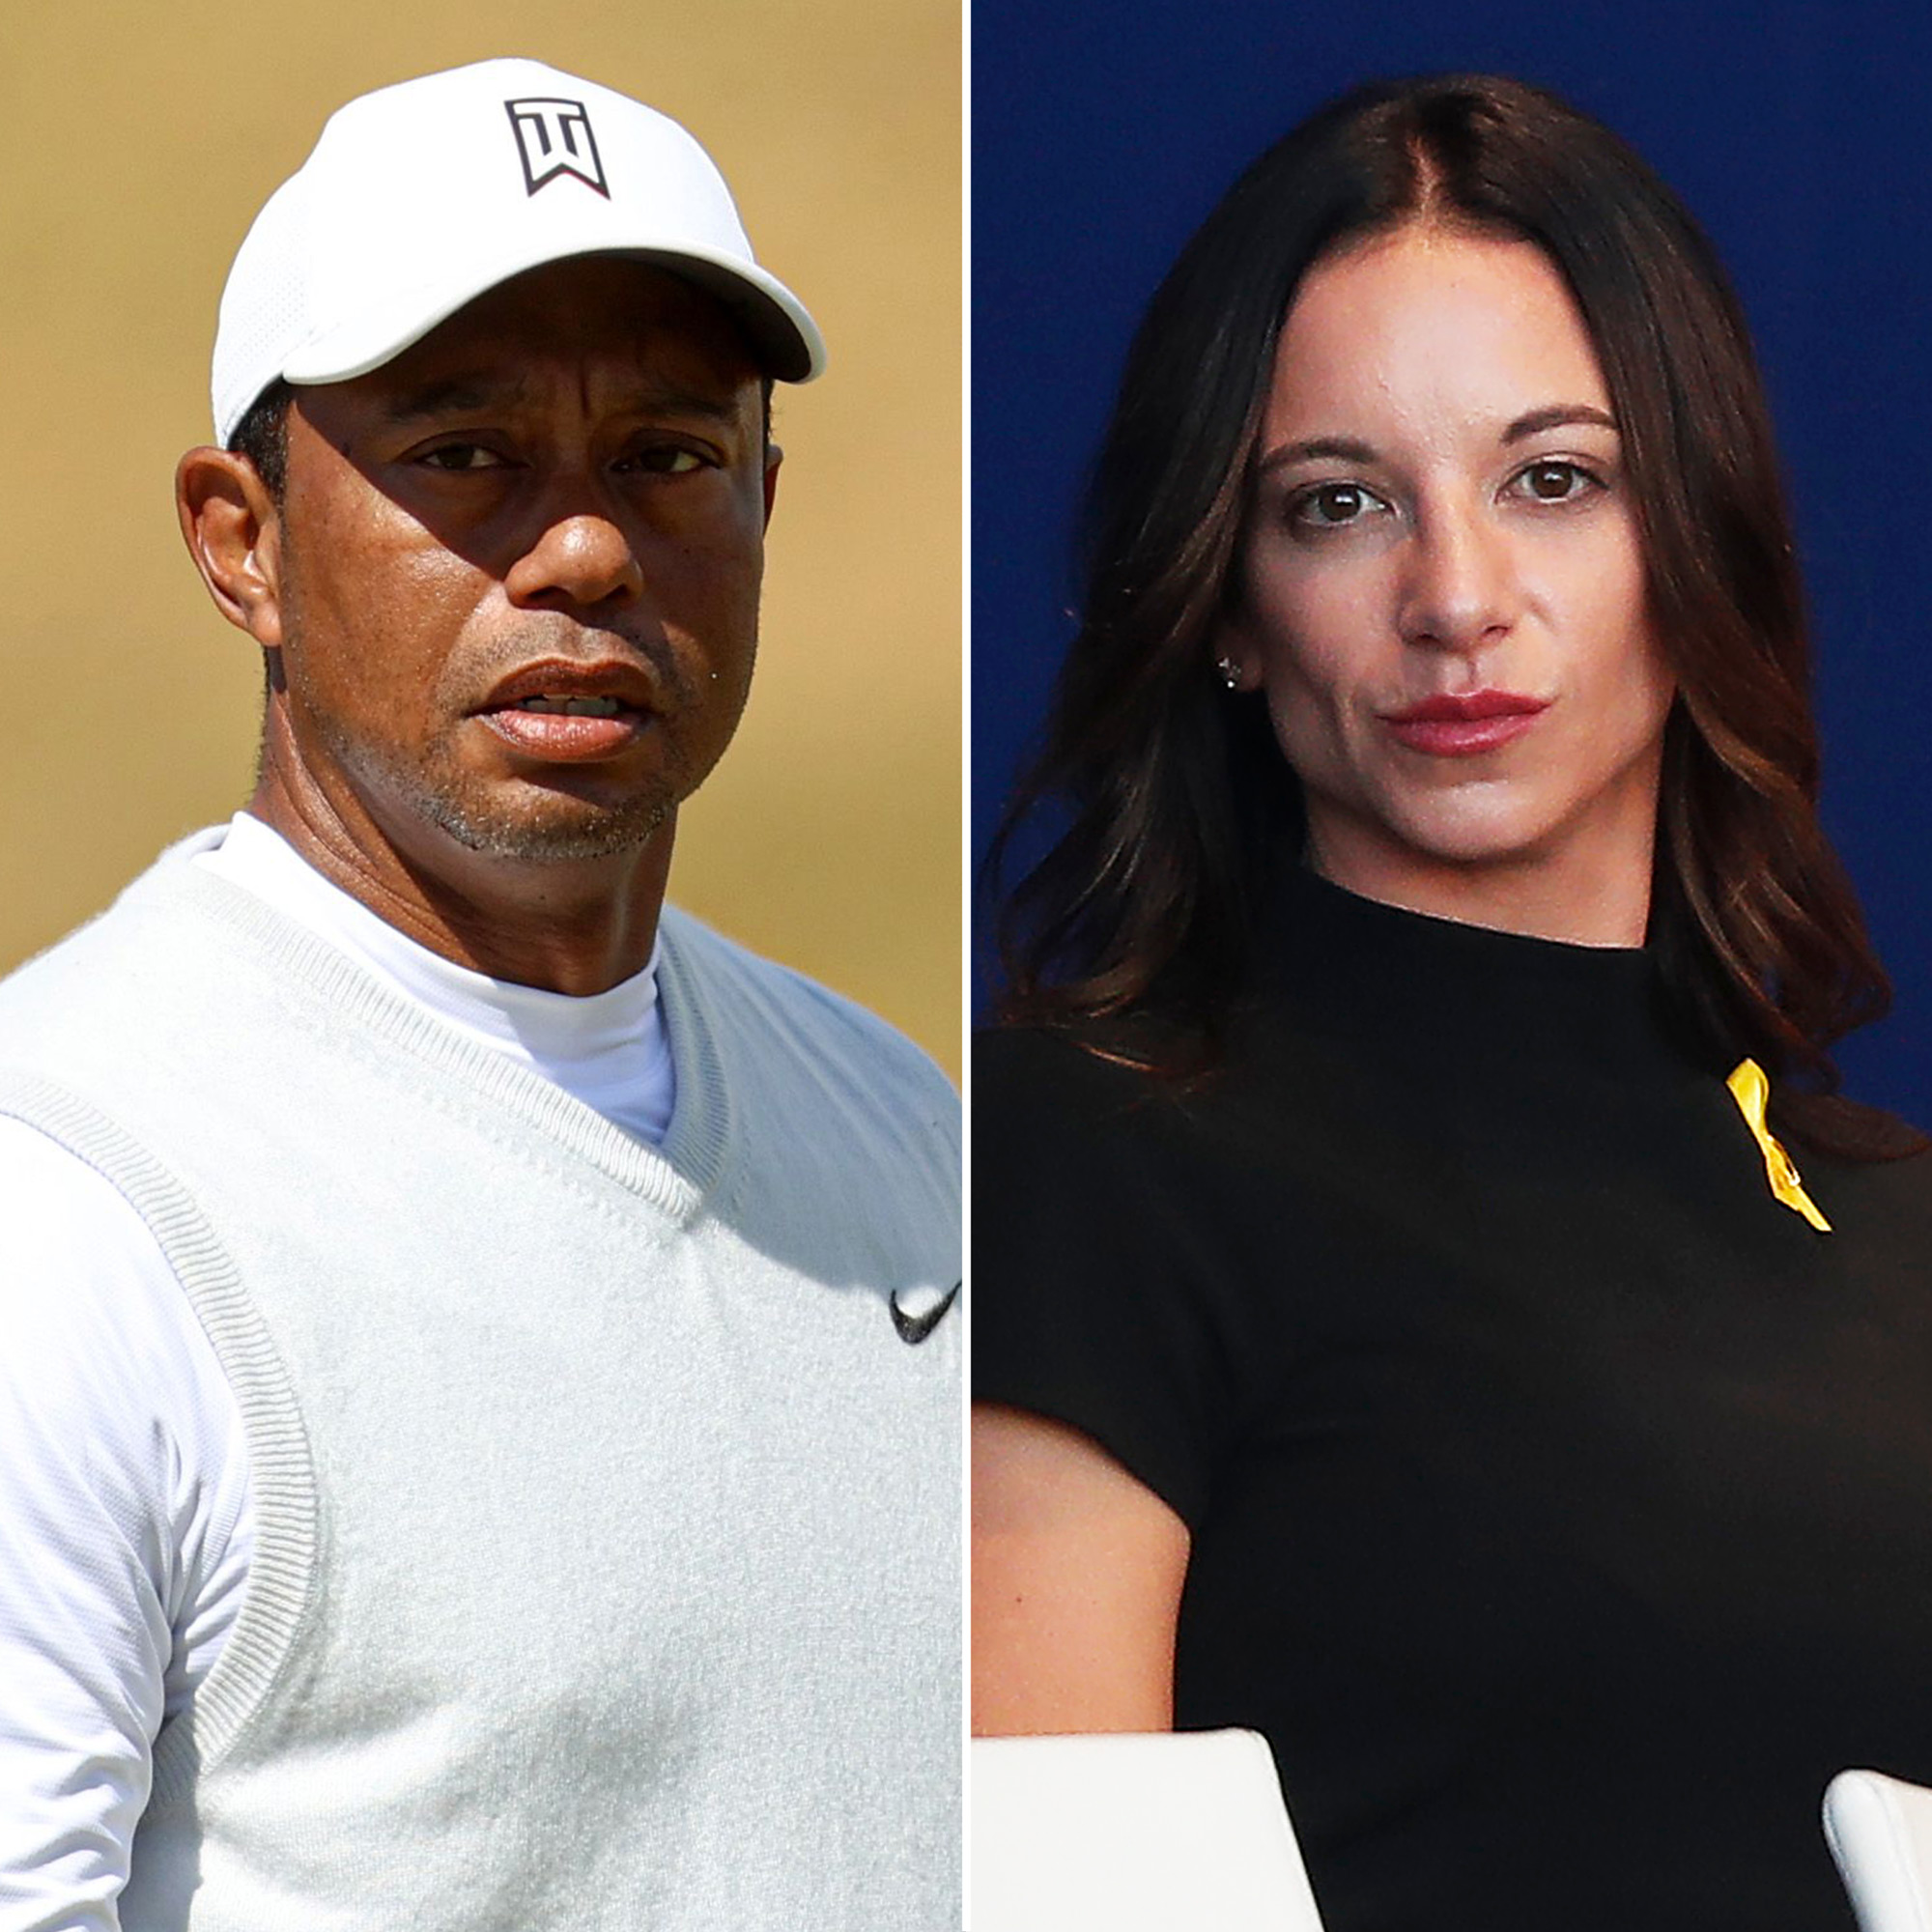 Tiger Woods and Erica Hermans Messy Split What to Know image pic